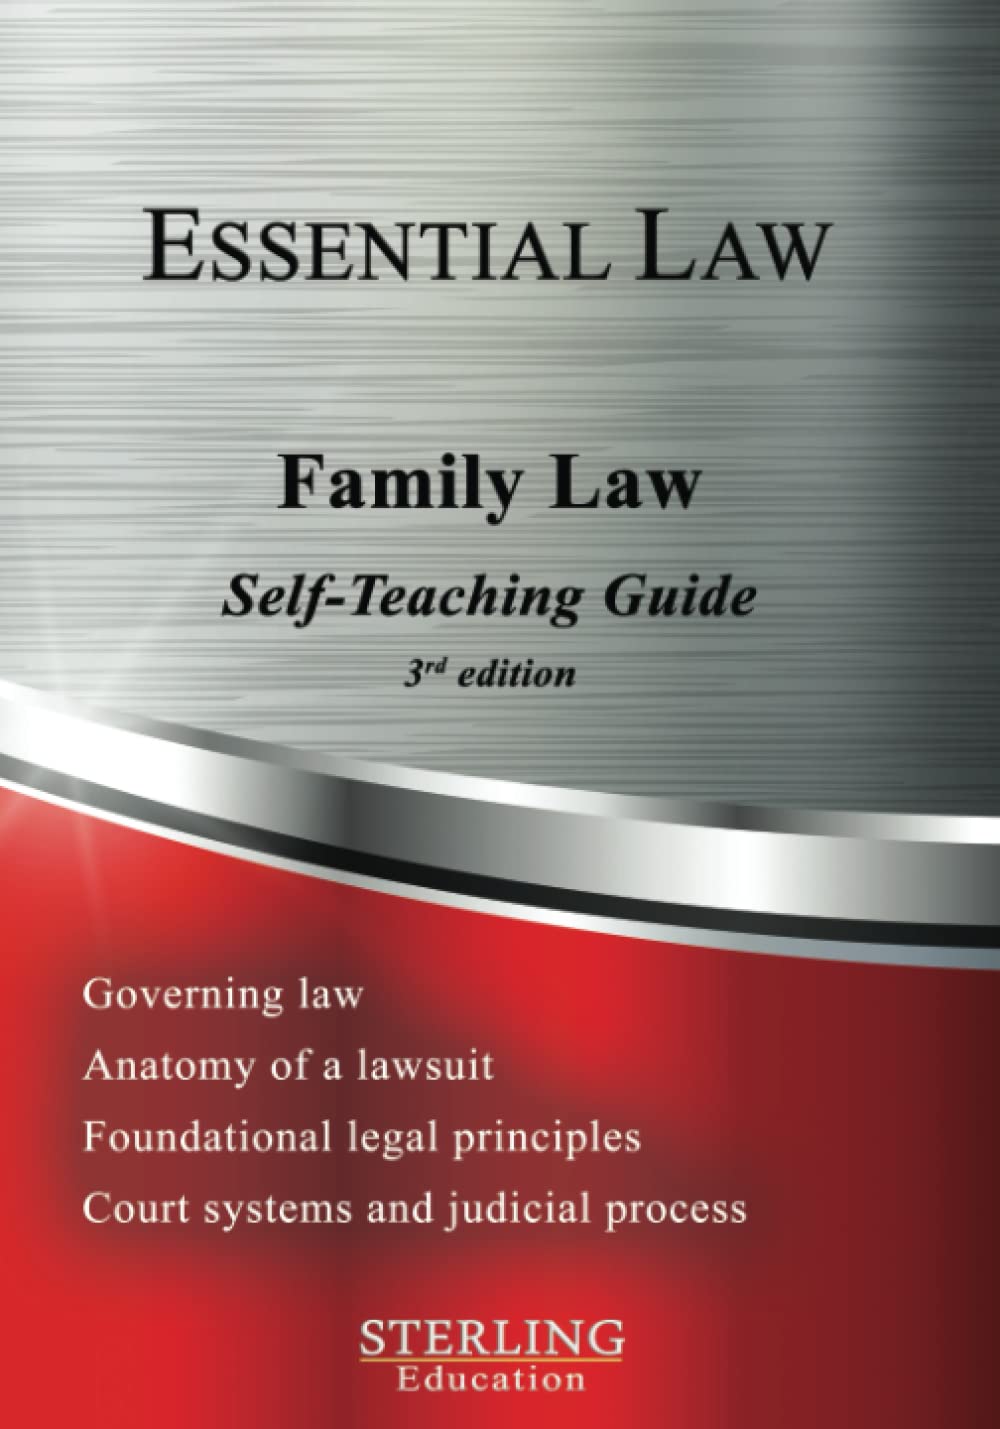 Family Law: Essential Law Self-Teaching Guide (Essential Law Self-Teaching Guides)